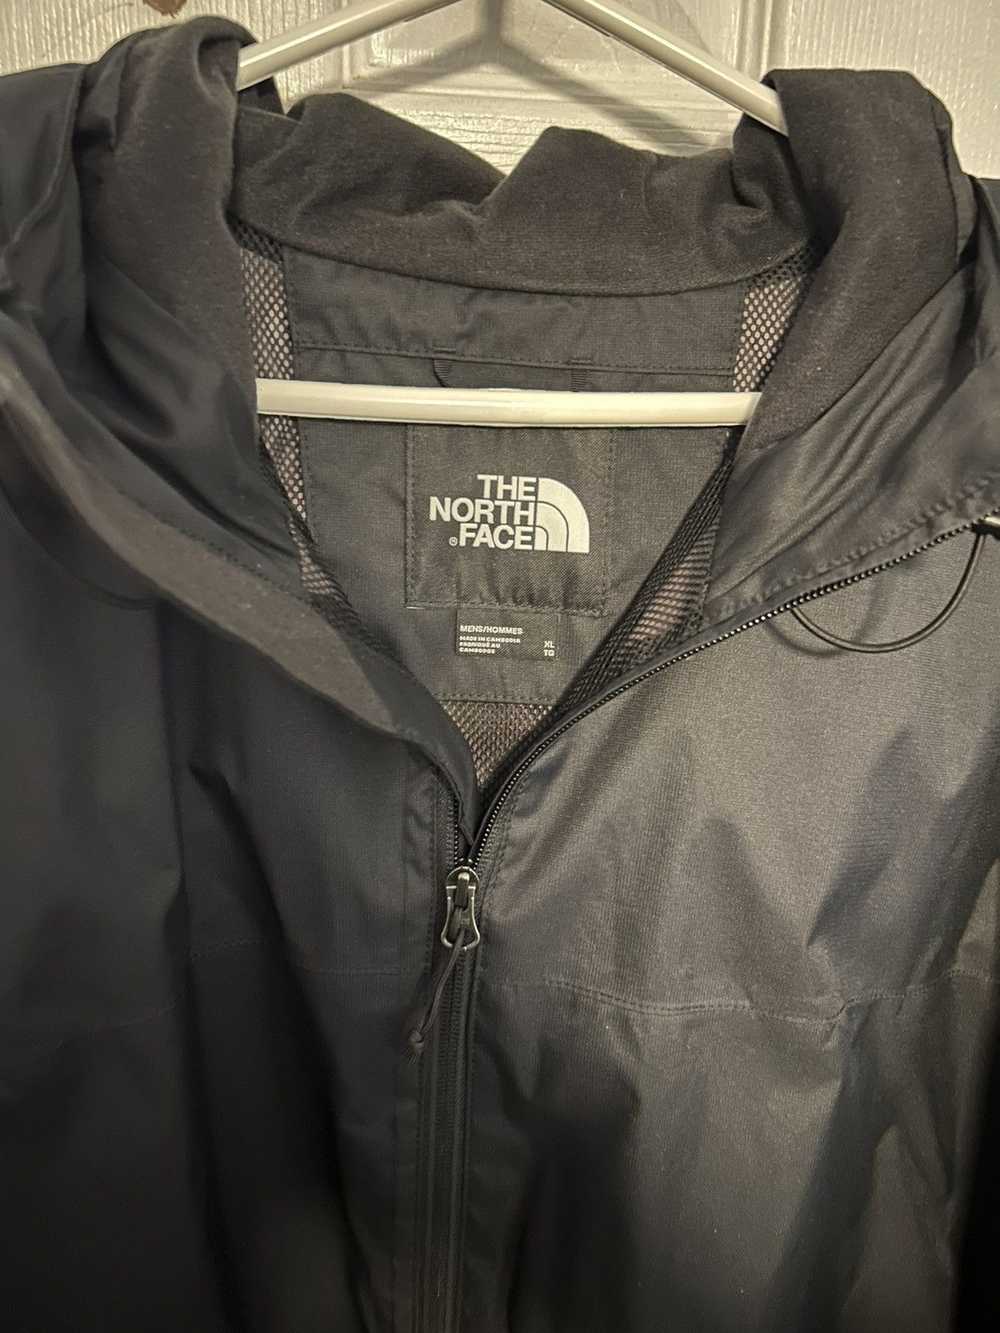 The North Face North Face Windbreaker - image 2